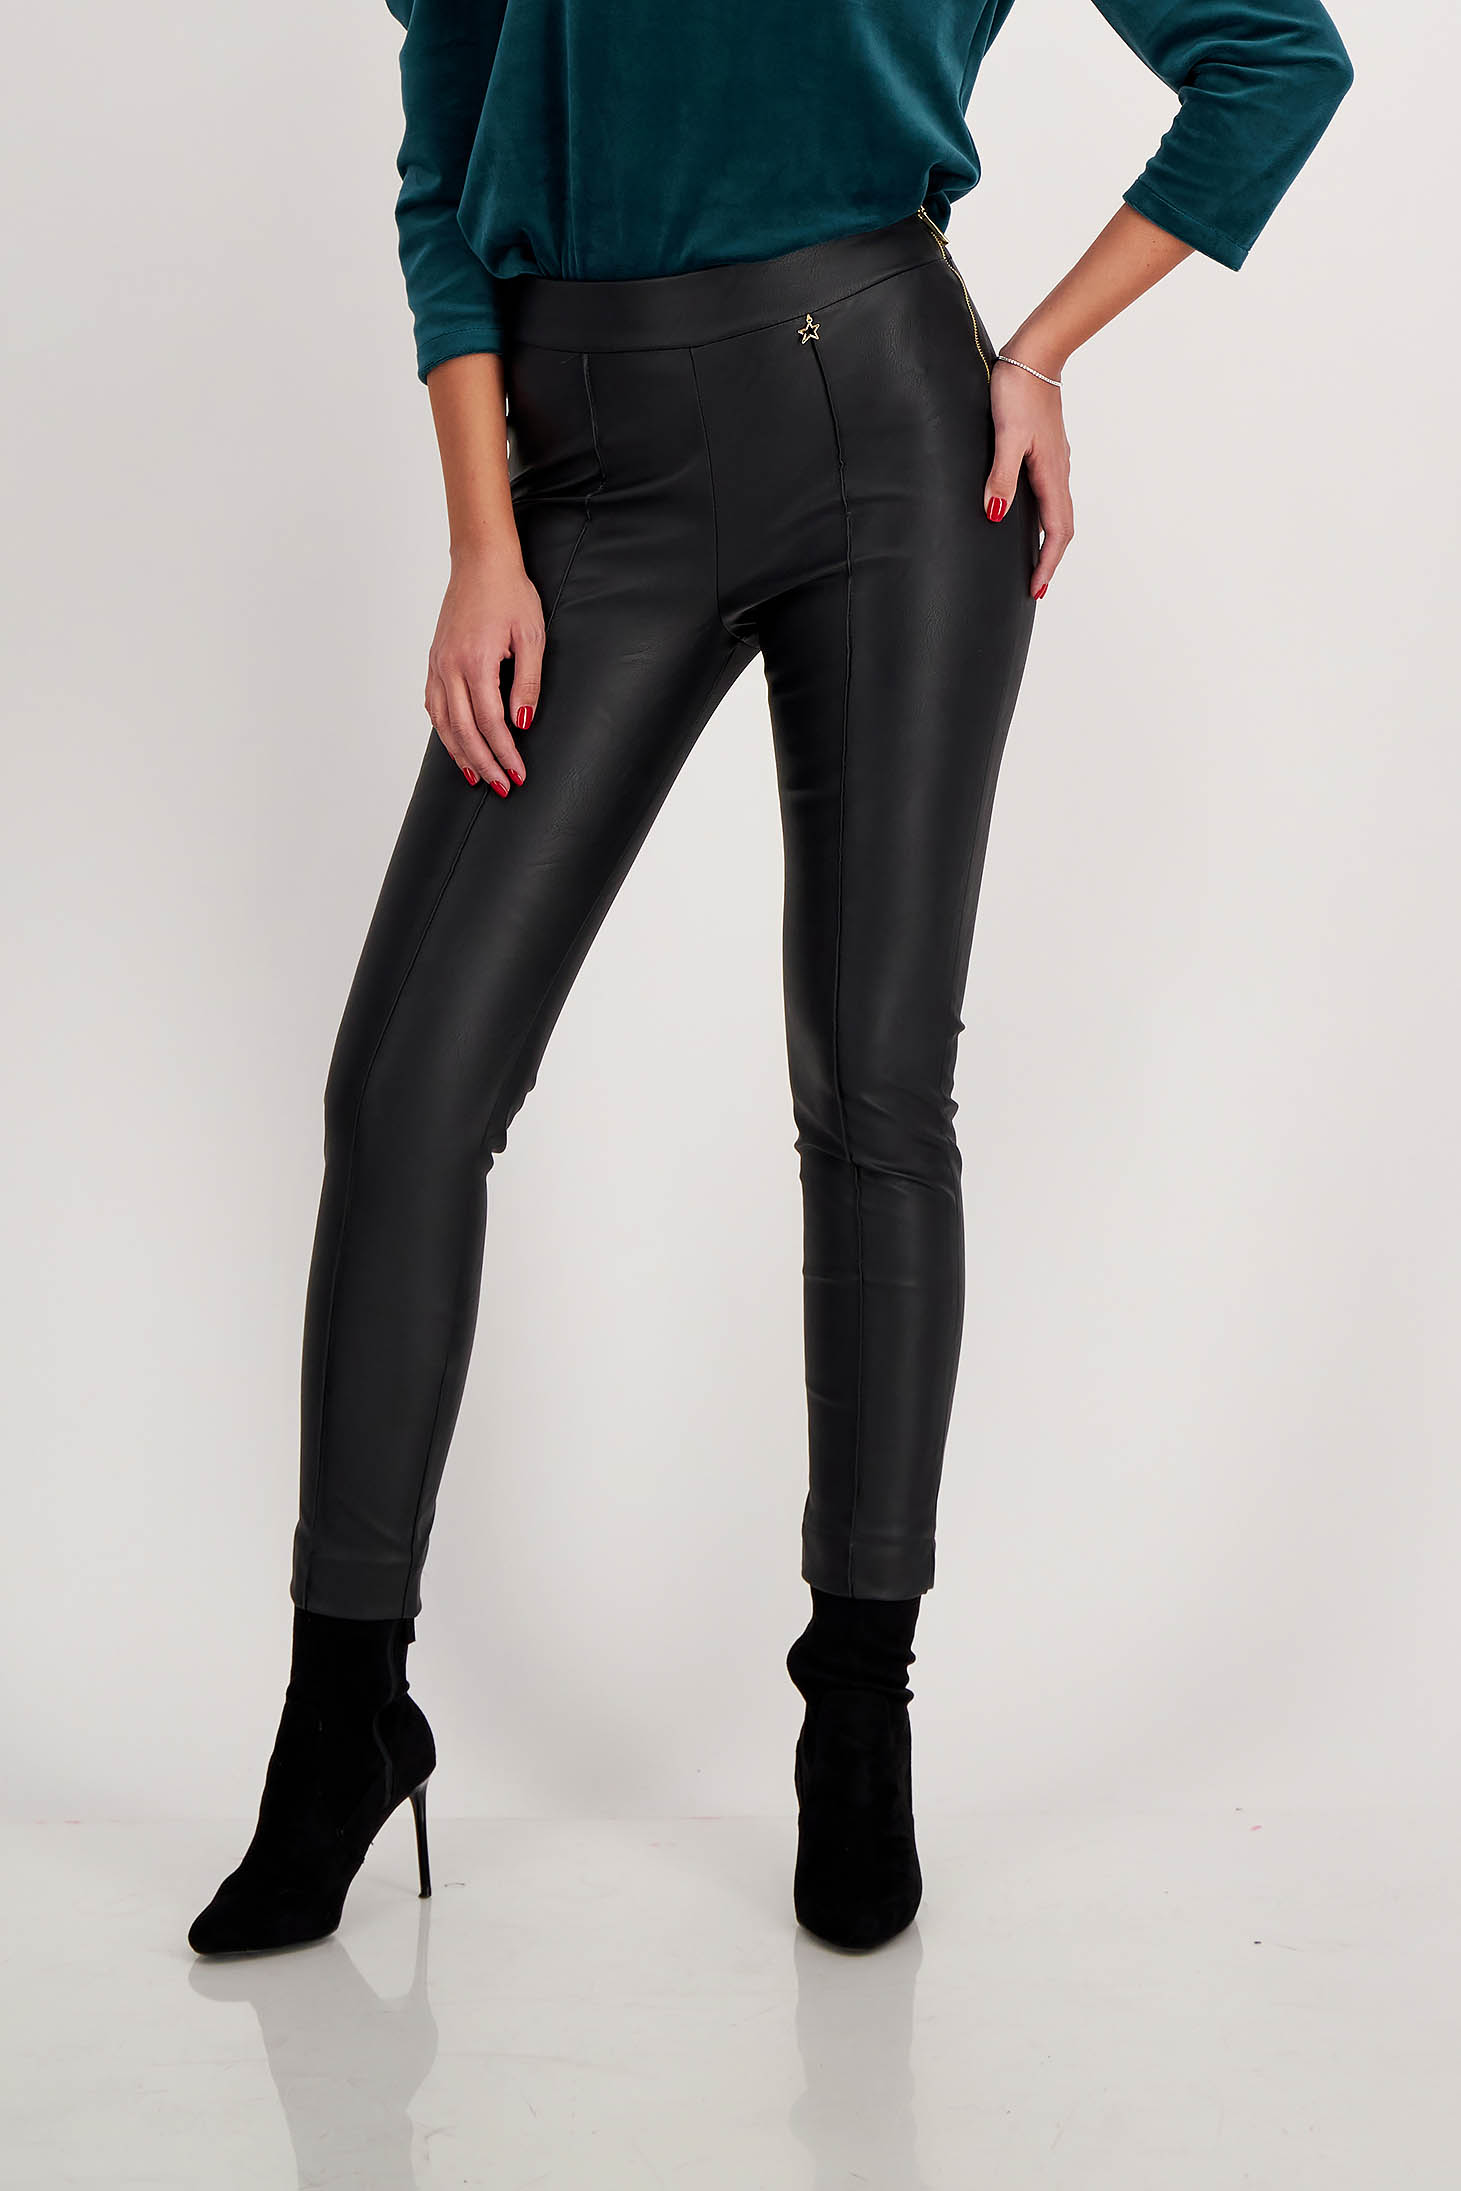 Black tapered high waist faux leather pants - StarShinerS 6 - StarShinerS.com